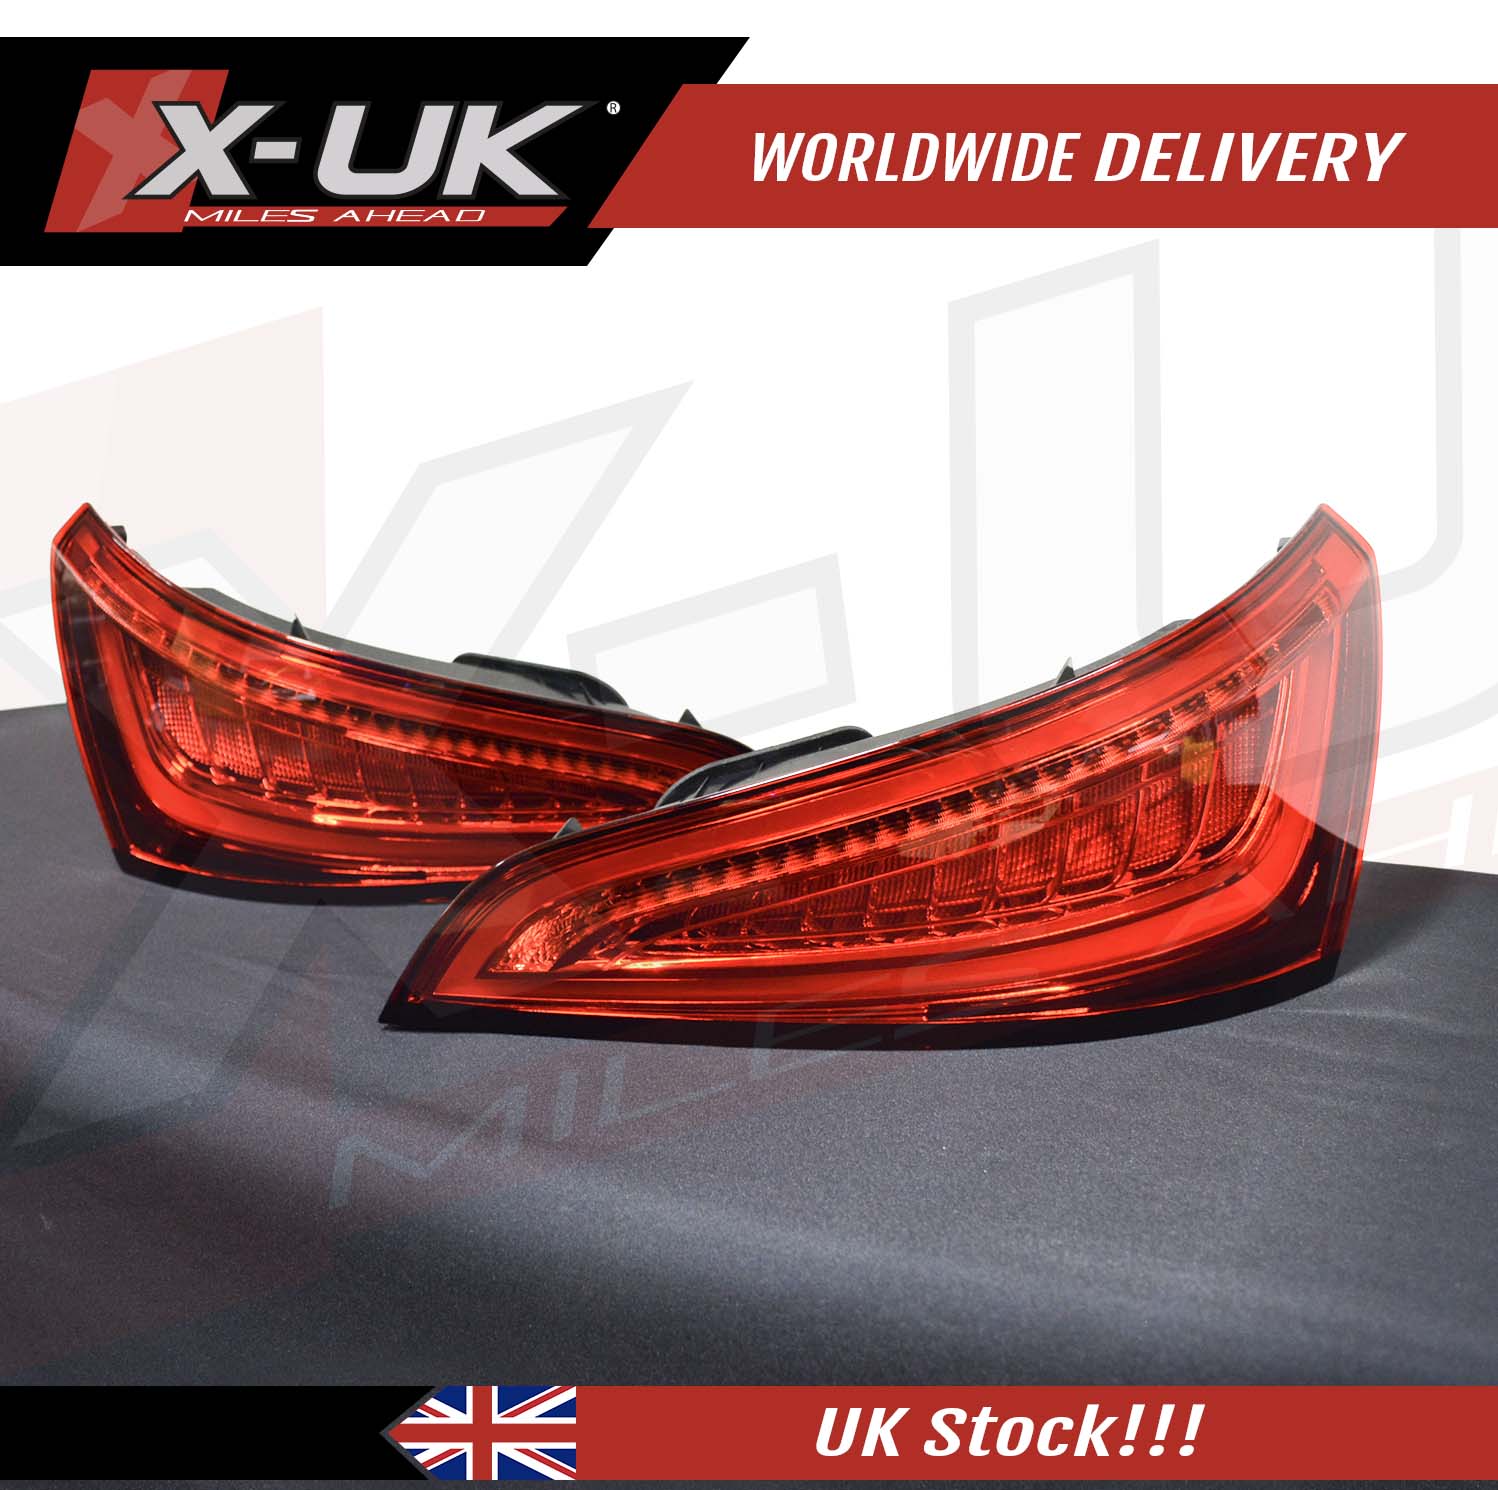 Bothersome Assumptions, assumptions. Guess Rarely Audi Q5 2012-2015 Rear LED dynamic tail lamps "fits right hand drive / Left  hand drive" - Xenonz UK